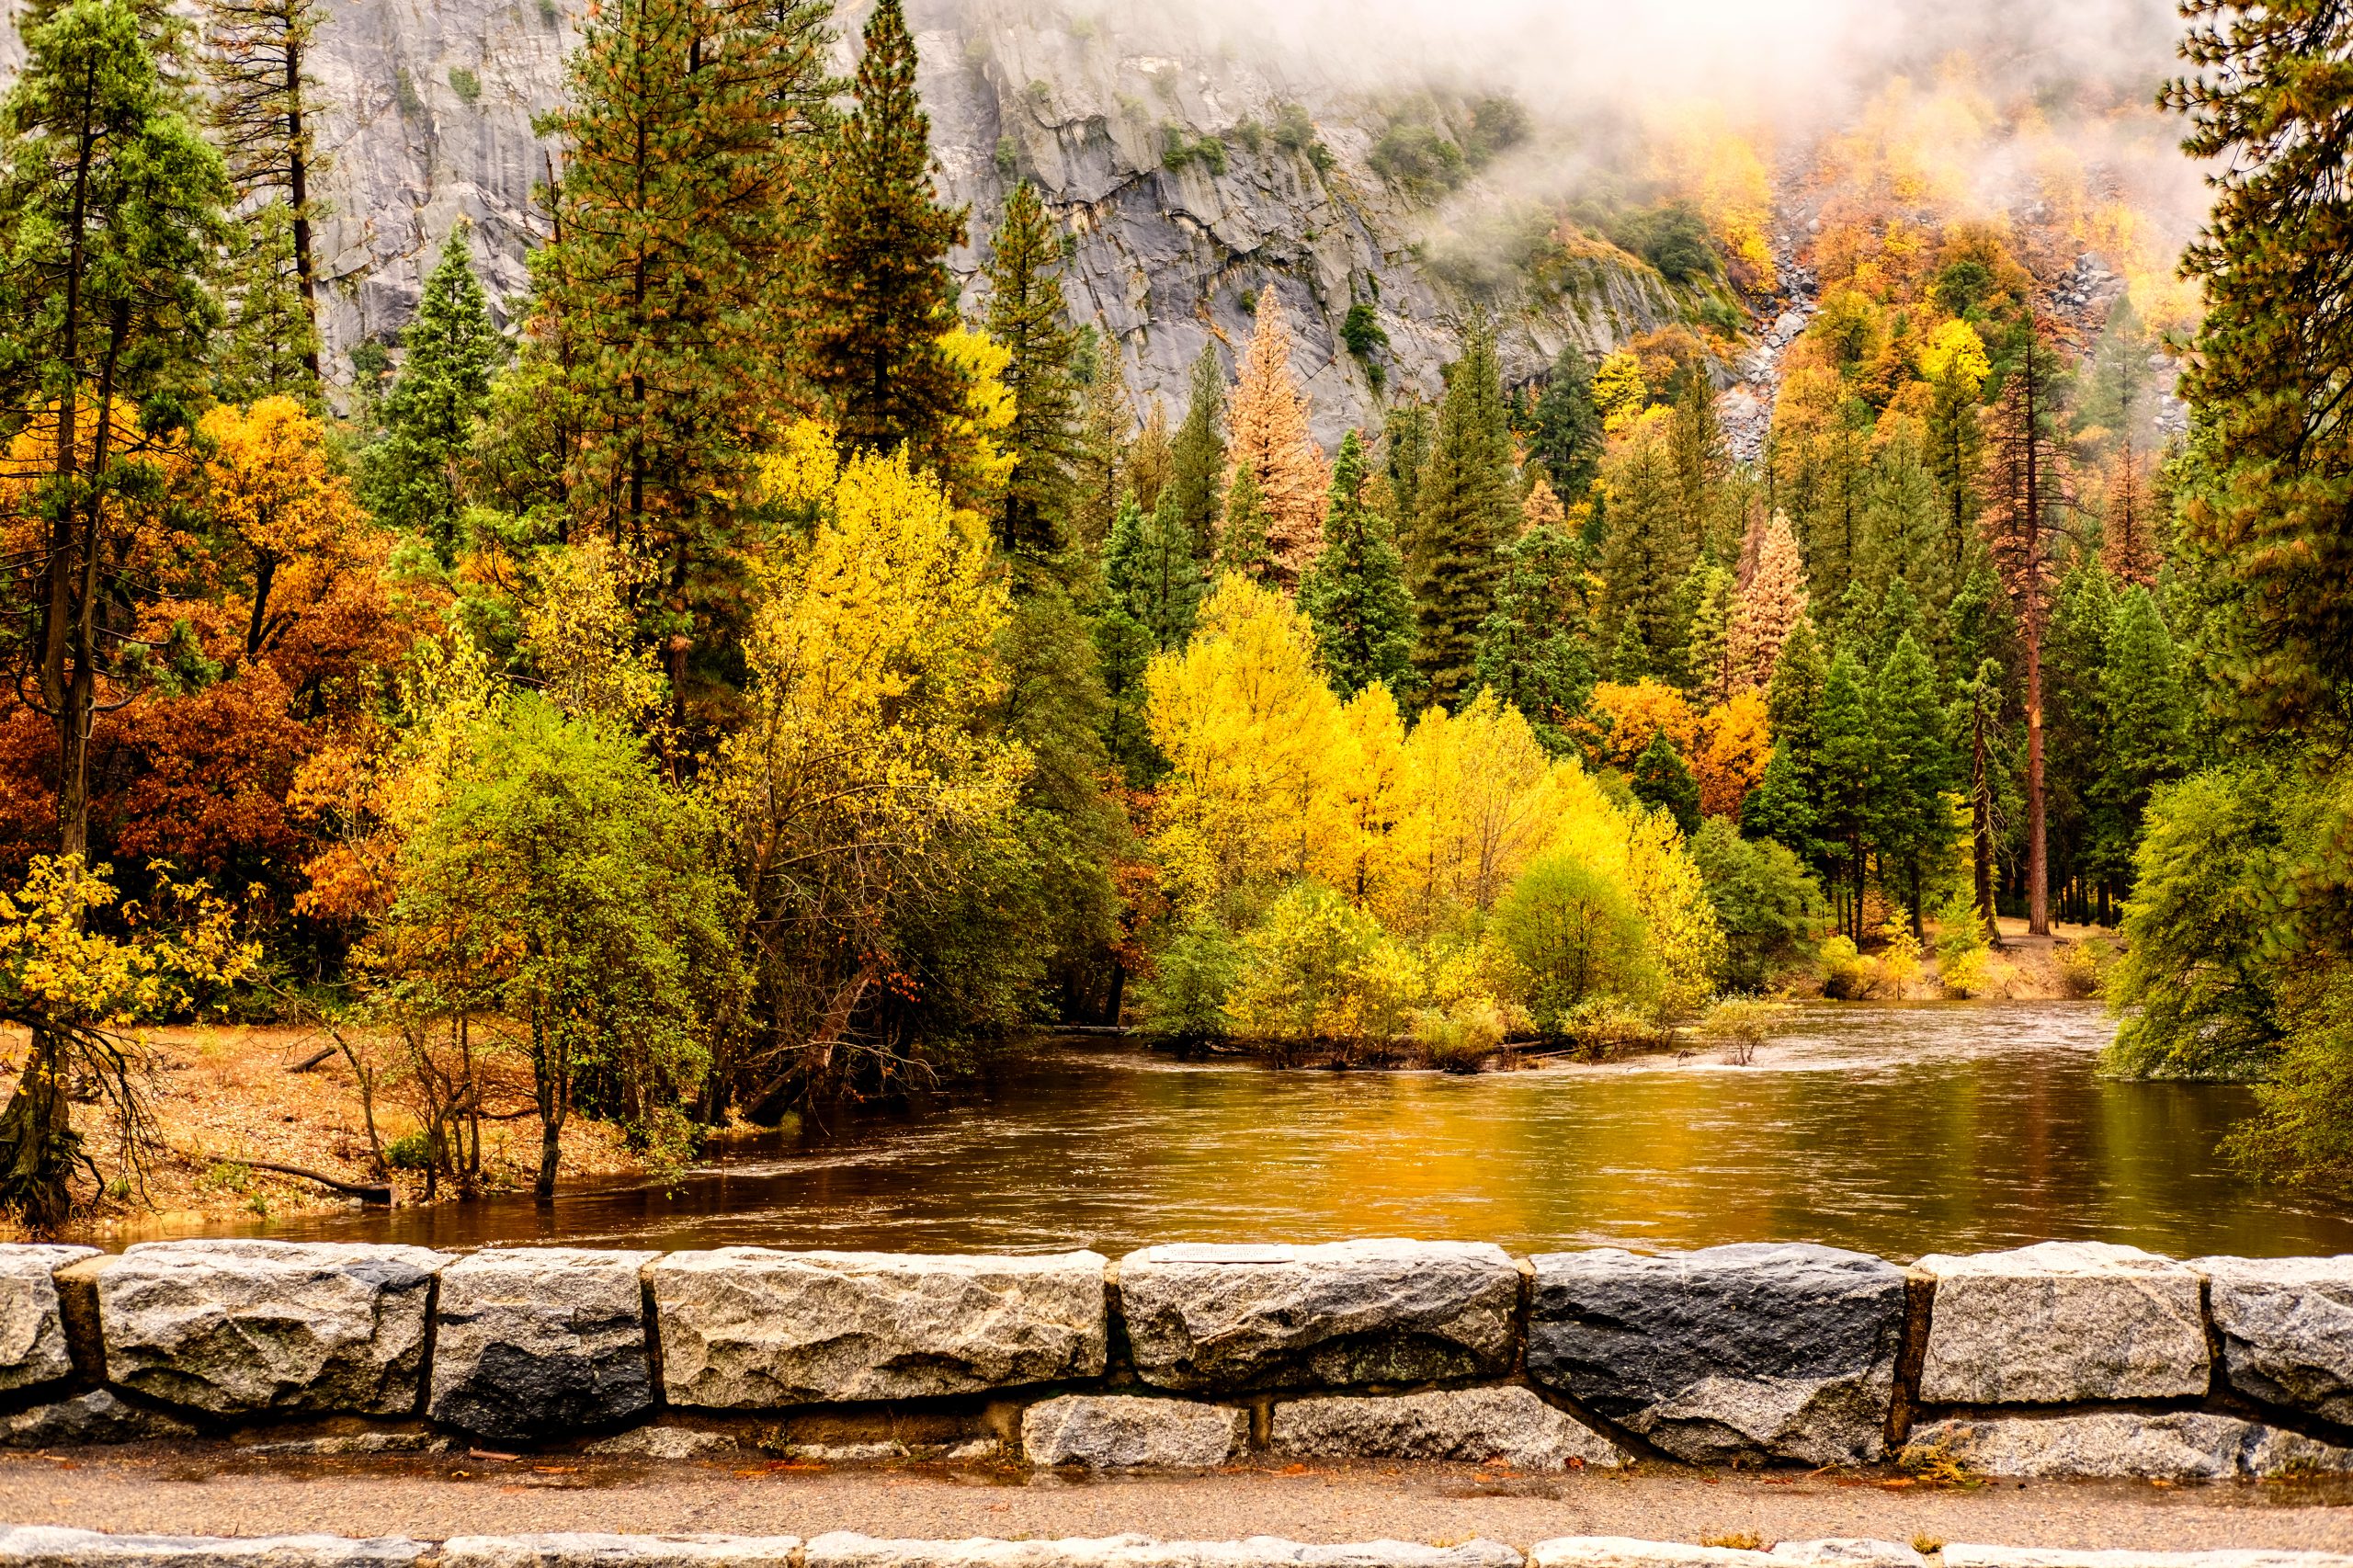 Yosemite National Park Valley and Merced River, California, USA, in autumn. Low clouds at the mountain tops and trees behind the river in shades of green, yellow, and orange, with a gray stone wall in the foreground.